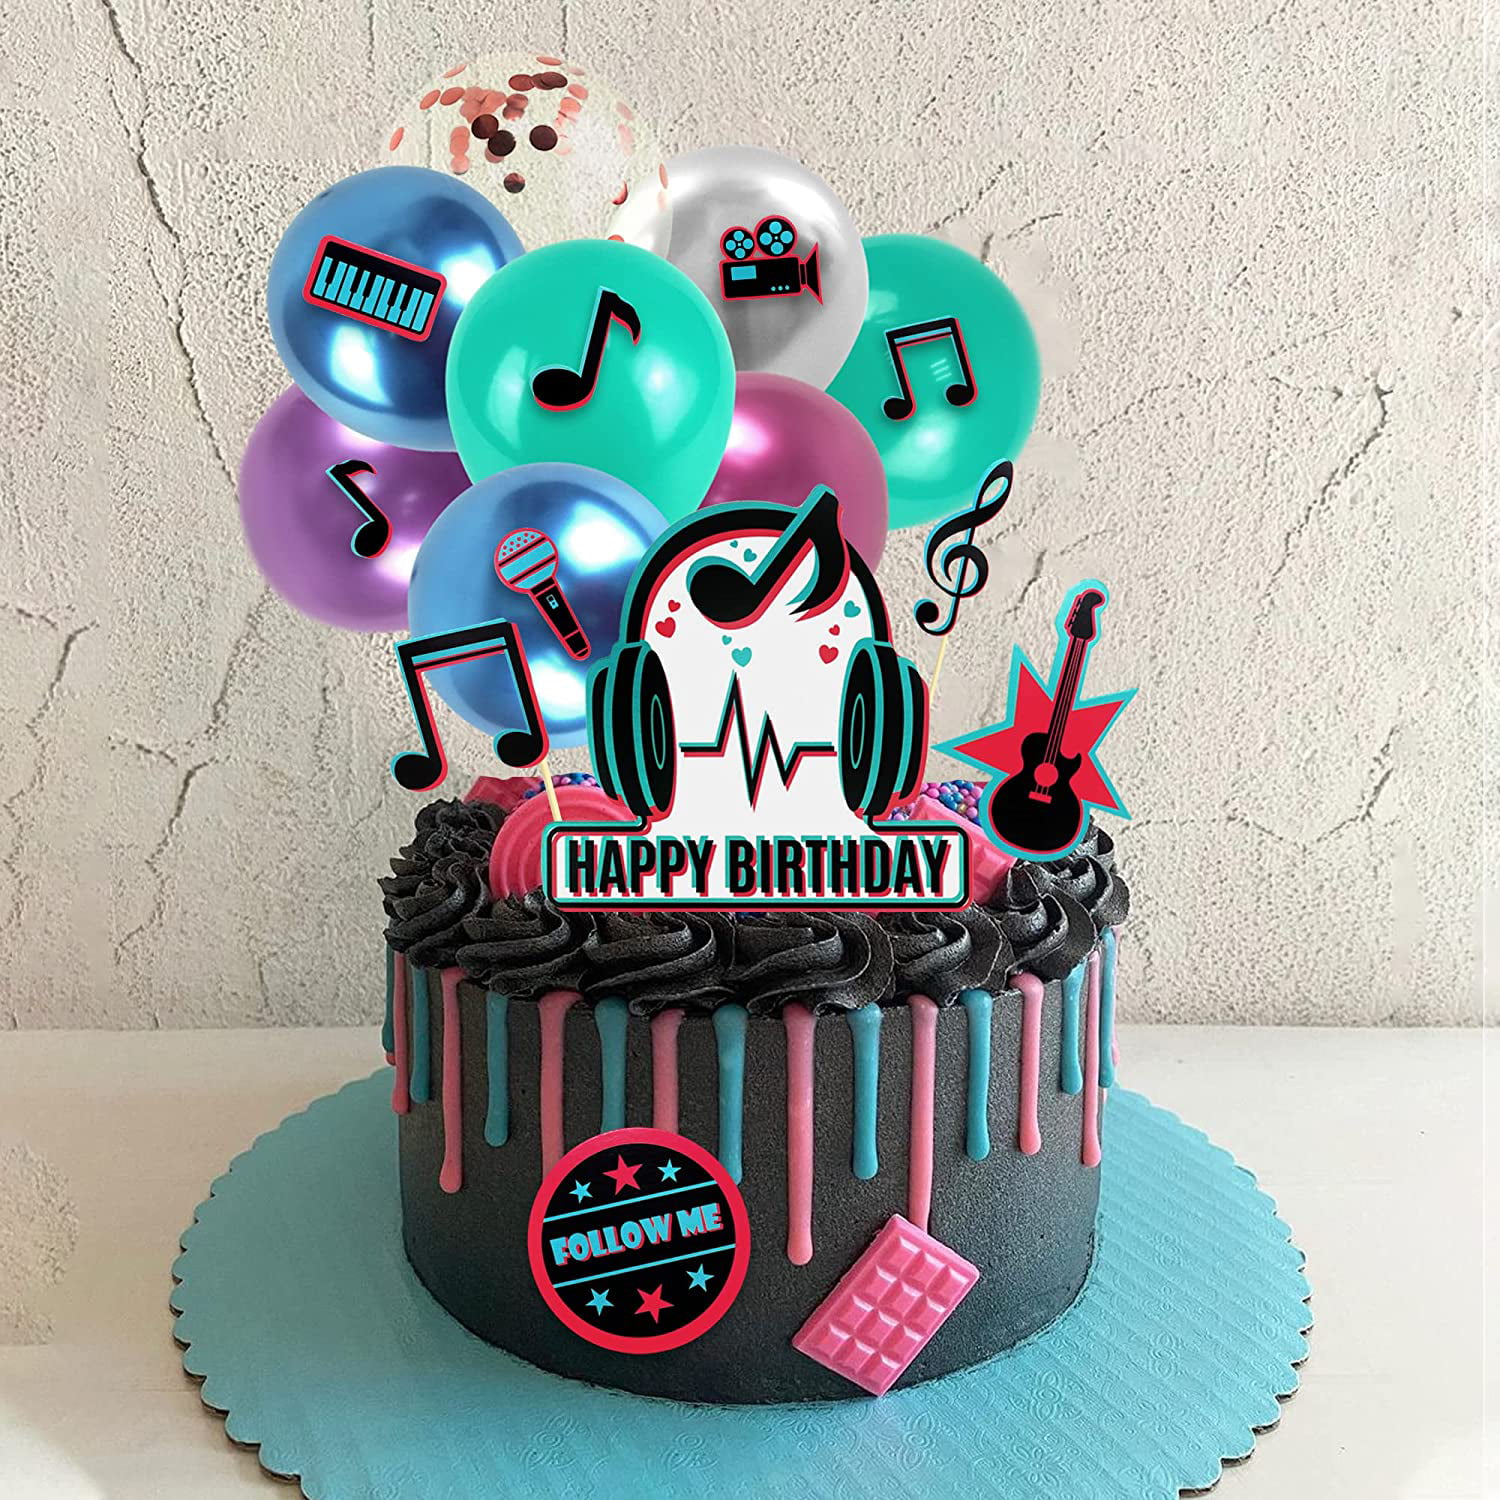 TIK Tok Cake Topper Hot Music Themed Party Decorations Birthday Party Decor Tik Tok Cakes App Decorations Social Media Party 